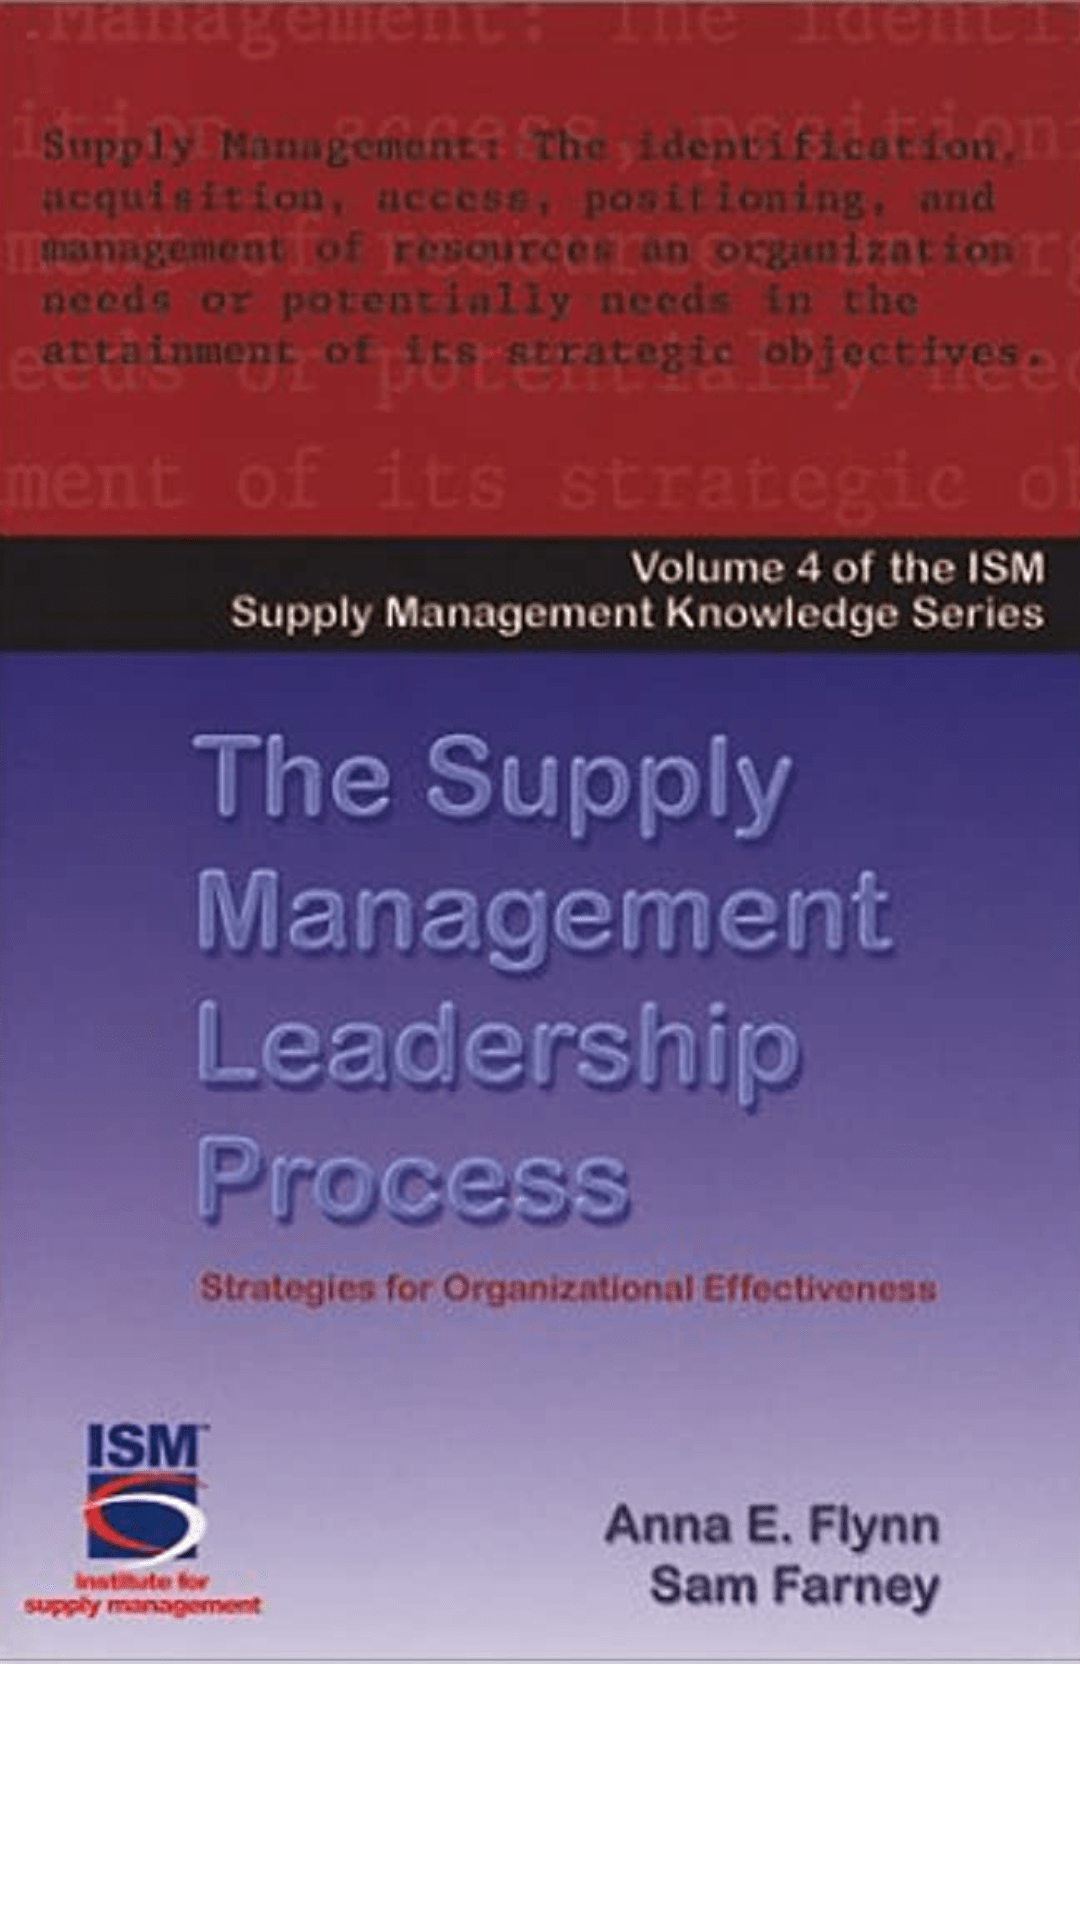 The Supply Management Leadership Process